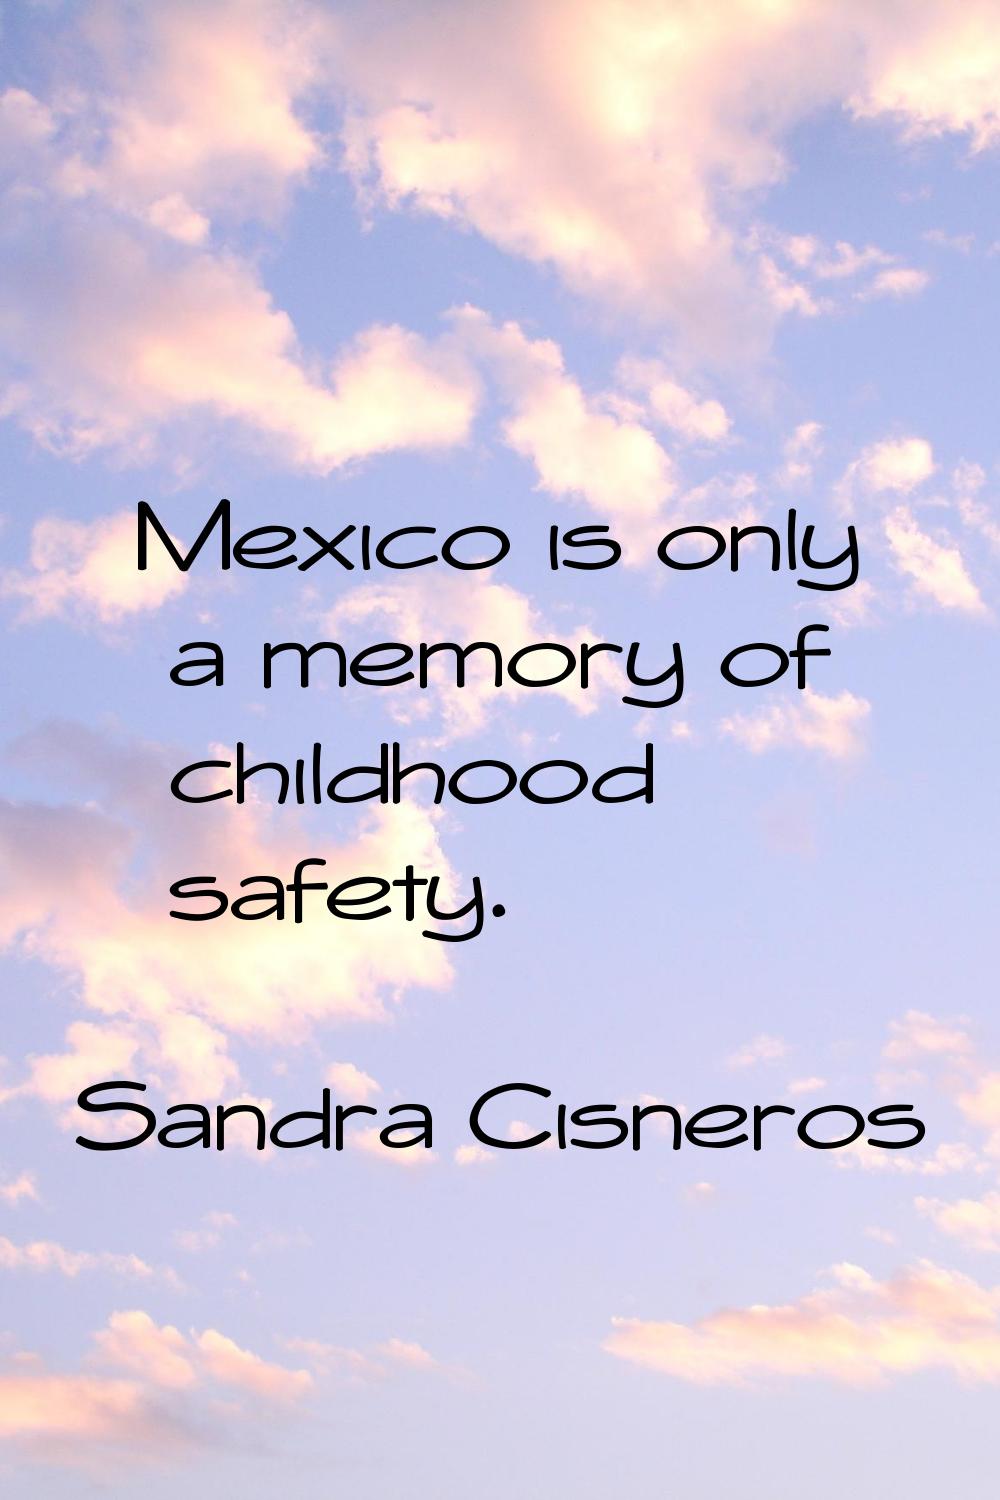 Mexico is only a memory of childhood safety.